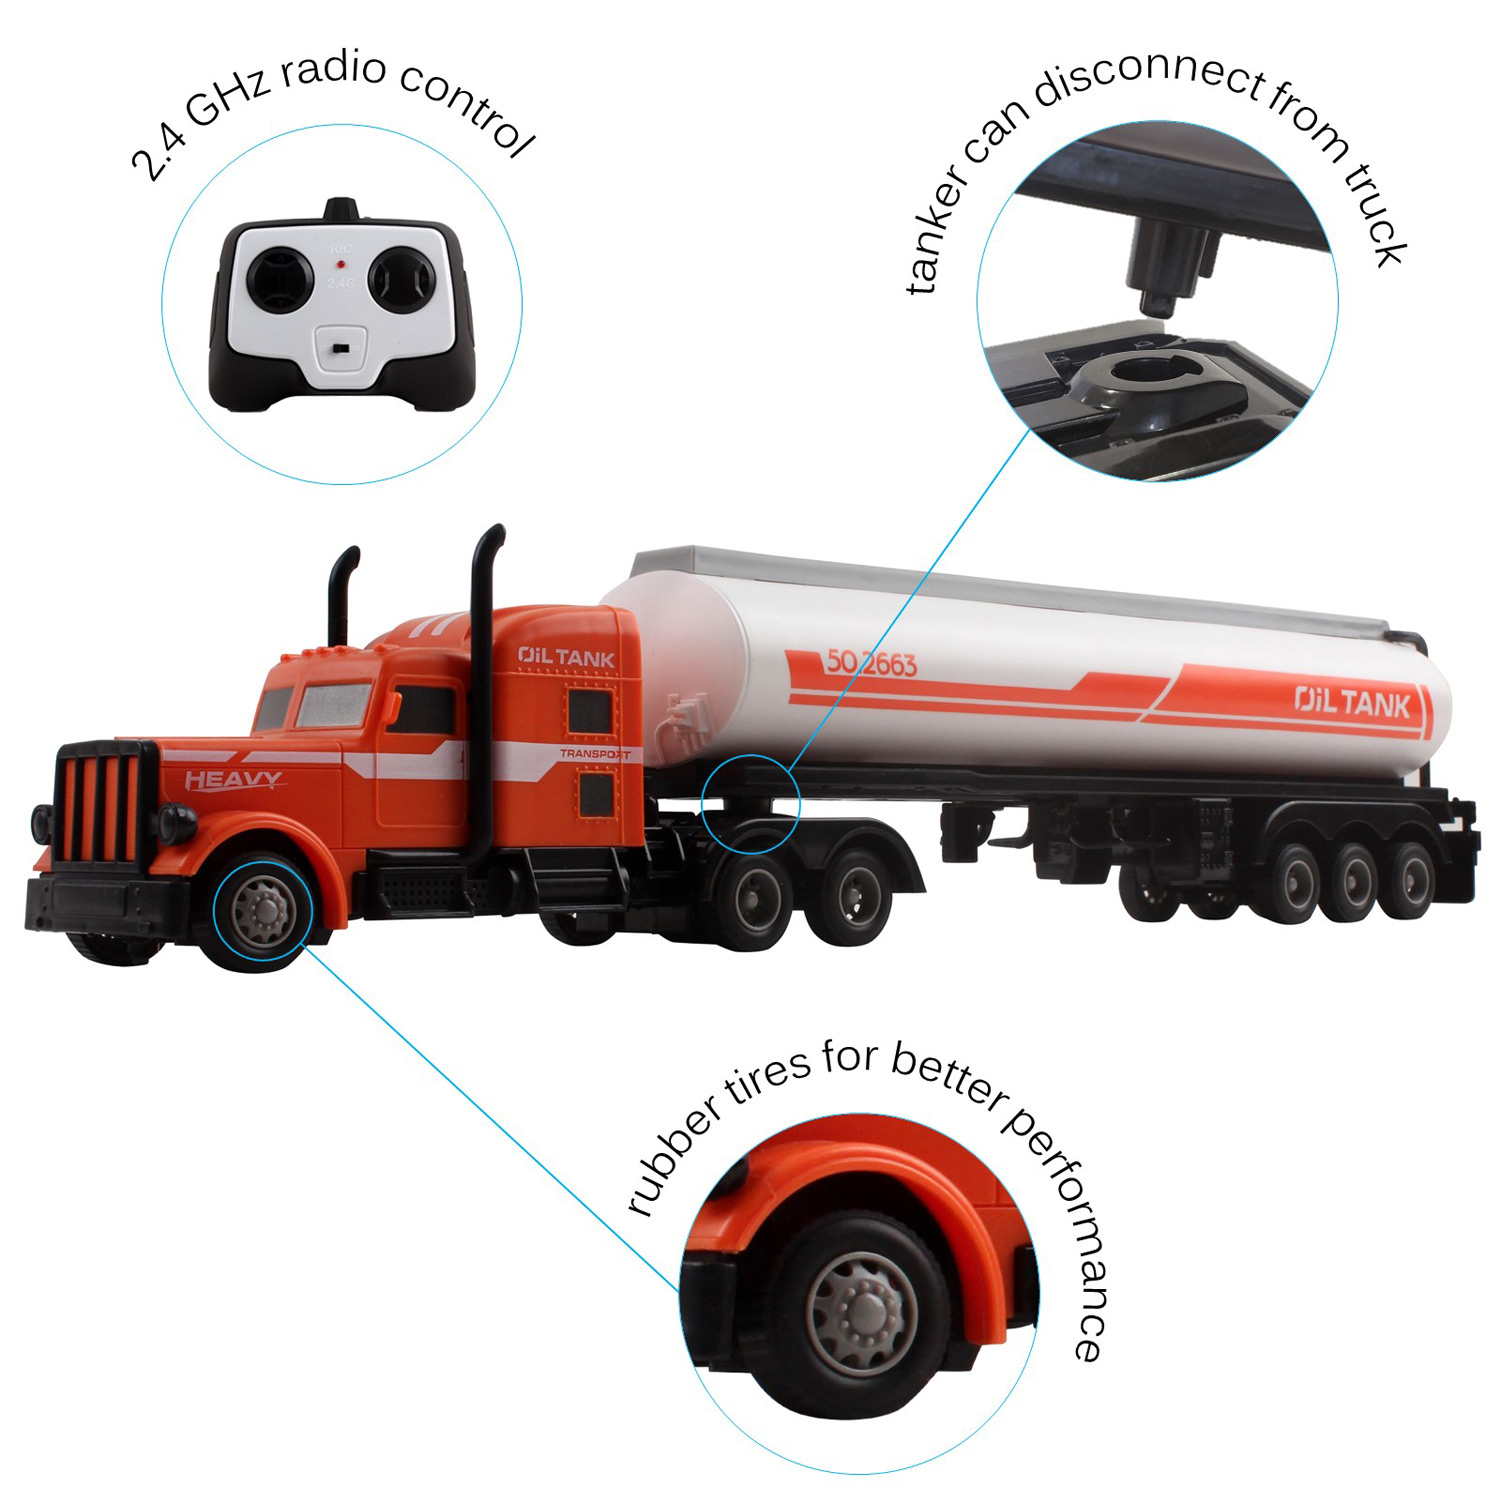 Large RC Toy Semi Truck Fuel Trailer 24Ghz Fast Speed 120 Scale Electric Oil Hauler Rechargeable Remote Control Kids Big Rig Carrier Transporter Vehicle Full Cargo Perfect Childrens Toy Gift TM-50